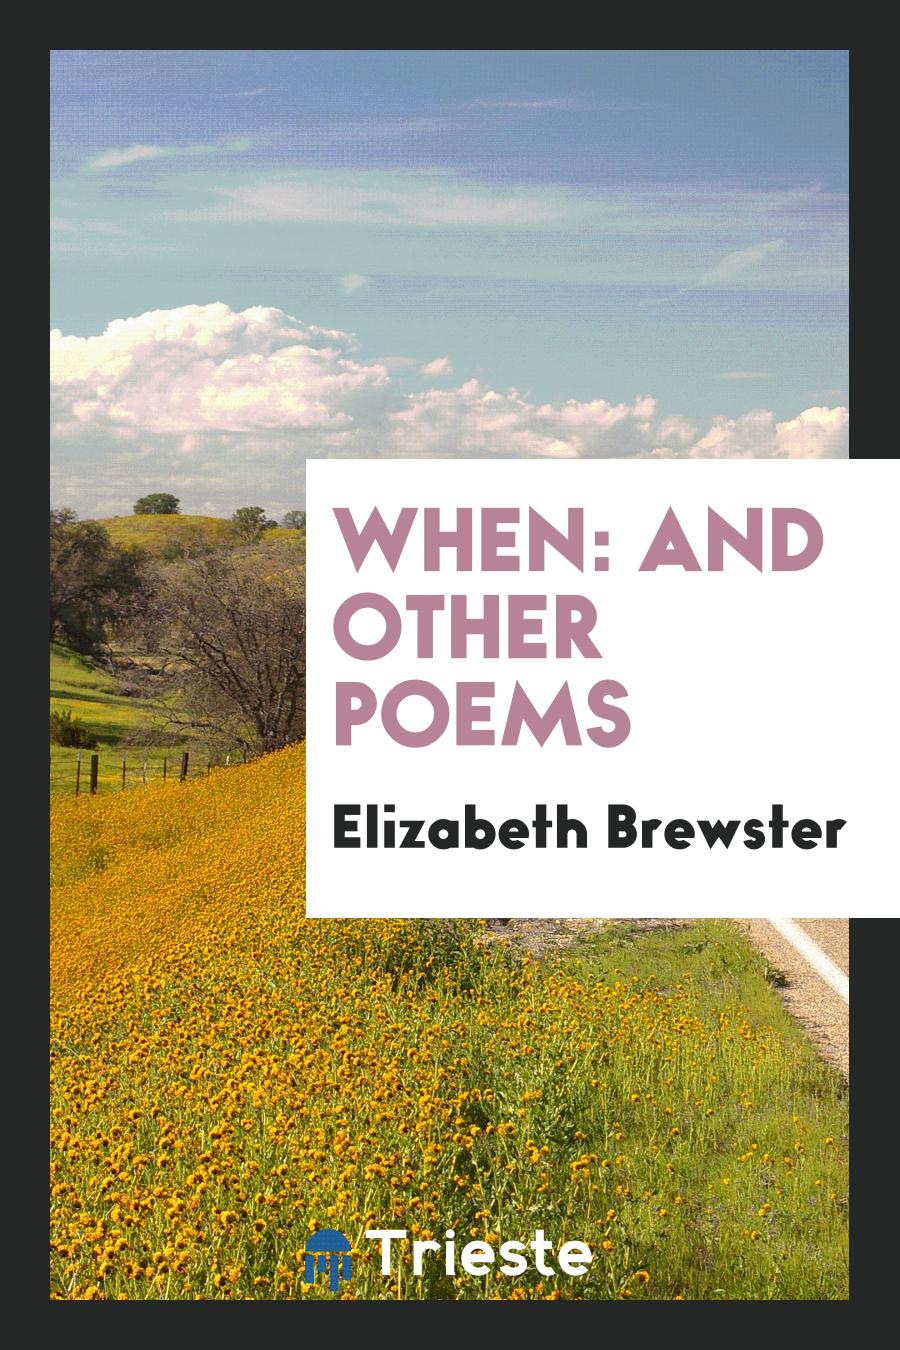 When: And Other Poems